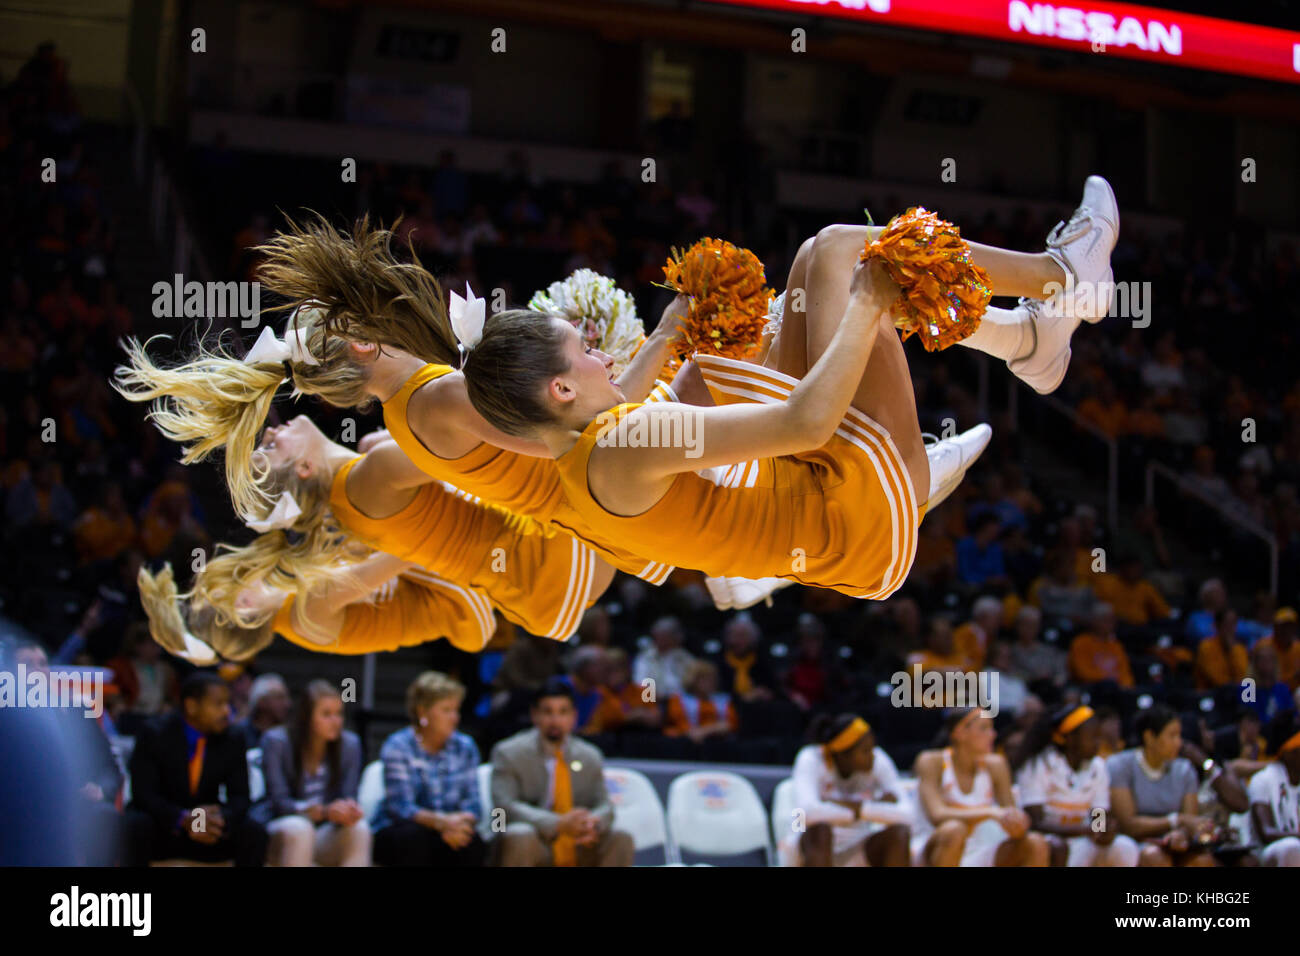 November 15, 2017: Tennessee Lady Volunteers cheerleaders during the NCAA basketball game between the University of Tennessee Lady Volunteers and James Madison University Dukes at Thompson Boling Arena in Knoxville TN Tim Gangloff/CSM Stock Photo